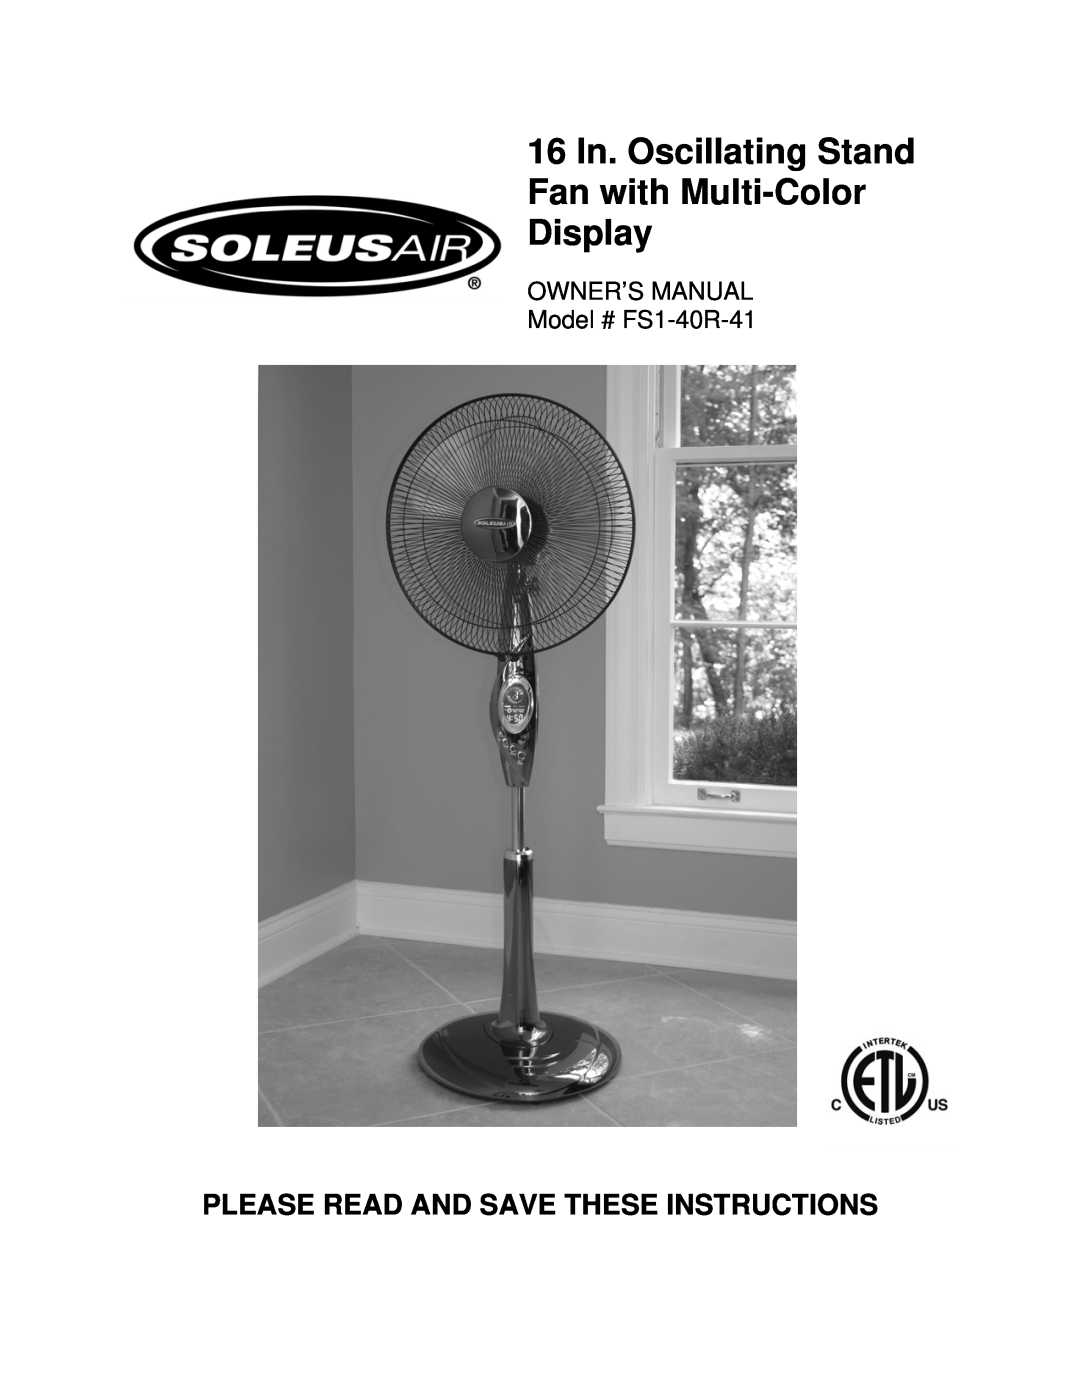 Soleus Air FS1-40R-41 owner manual Please Read And Save These Instructions 